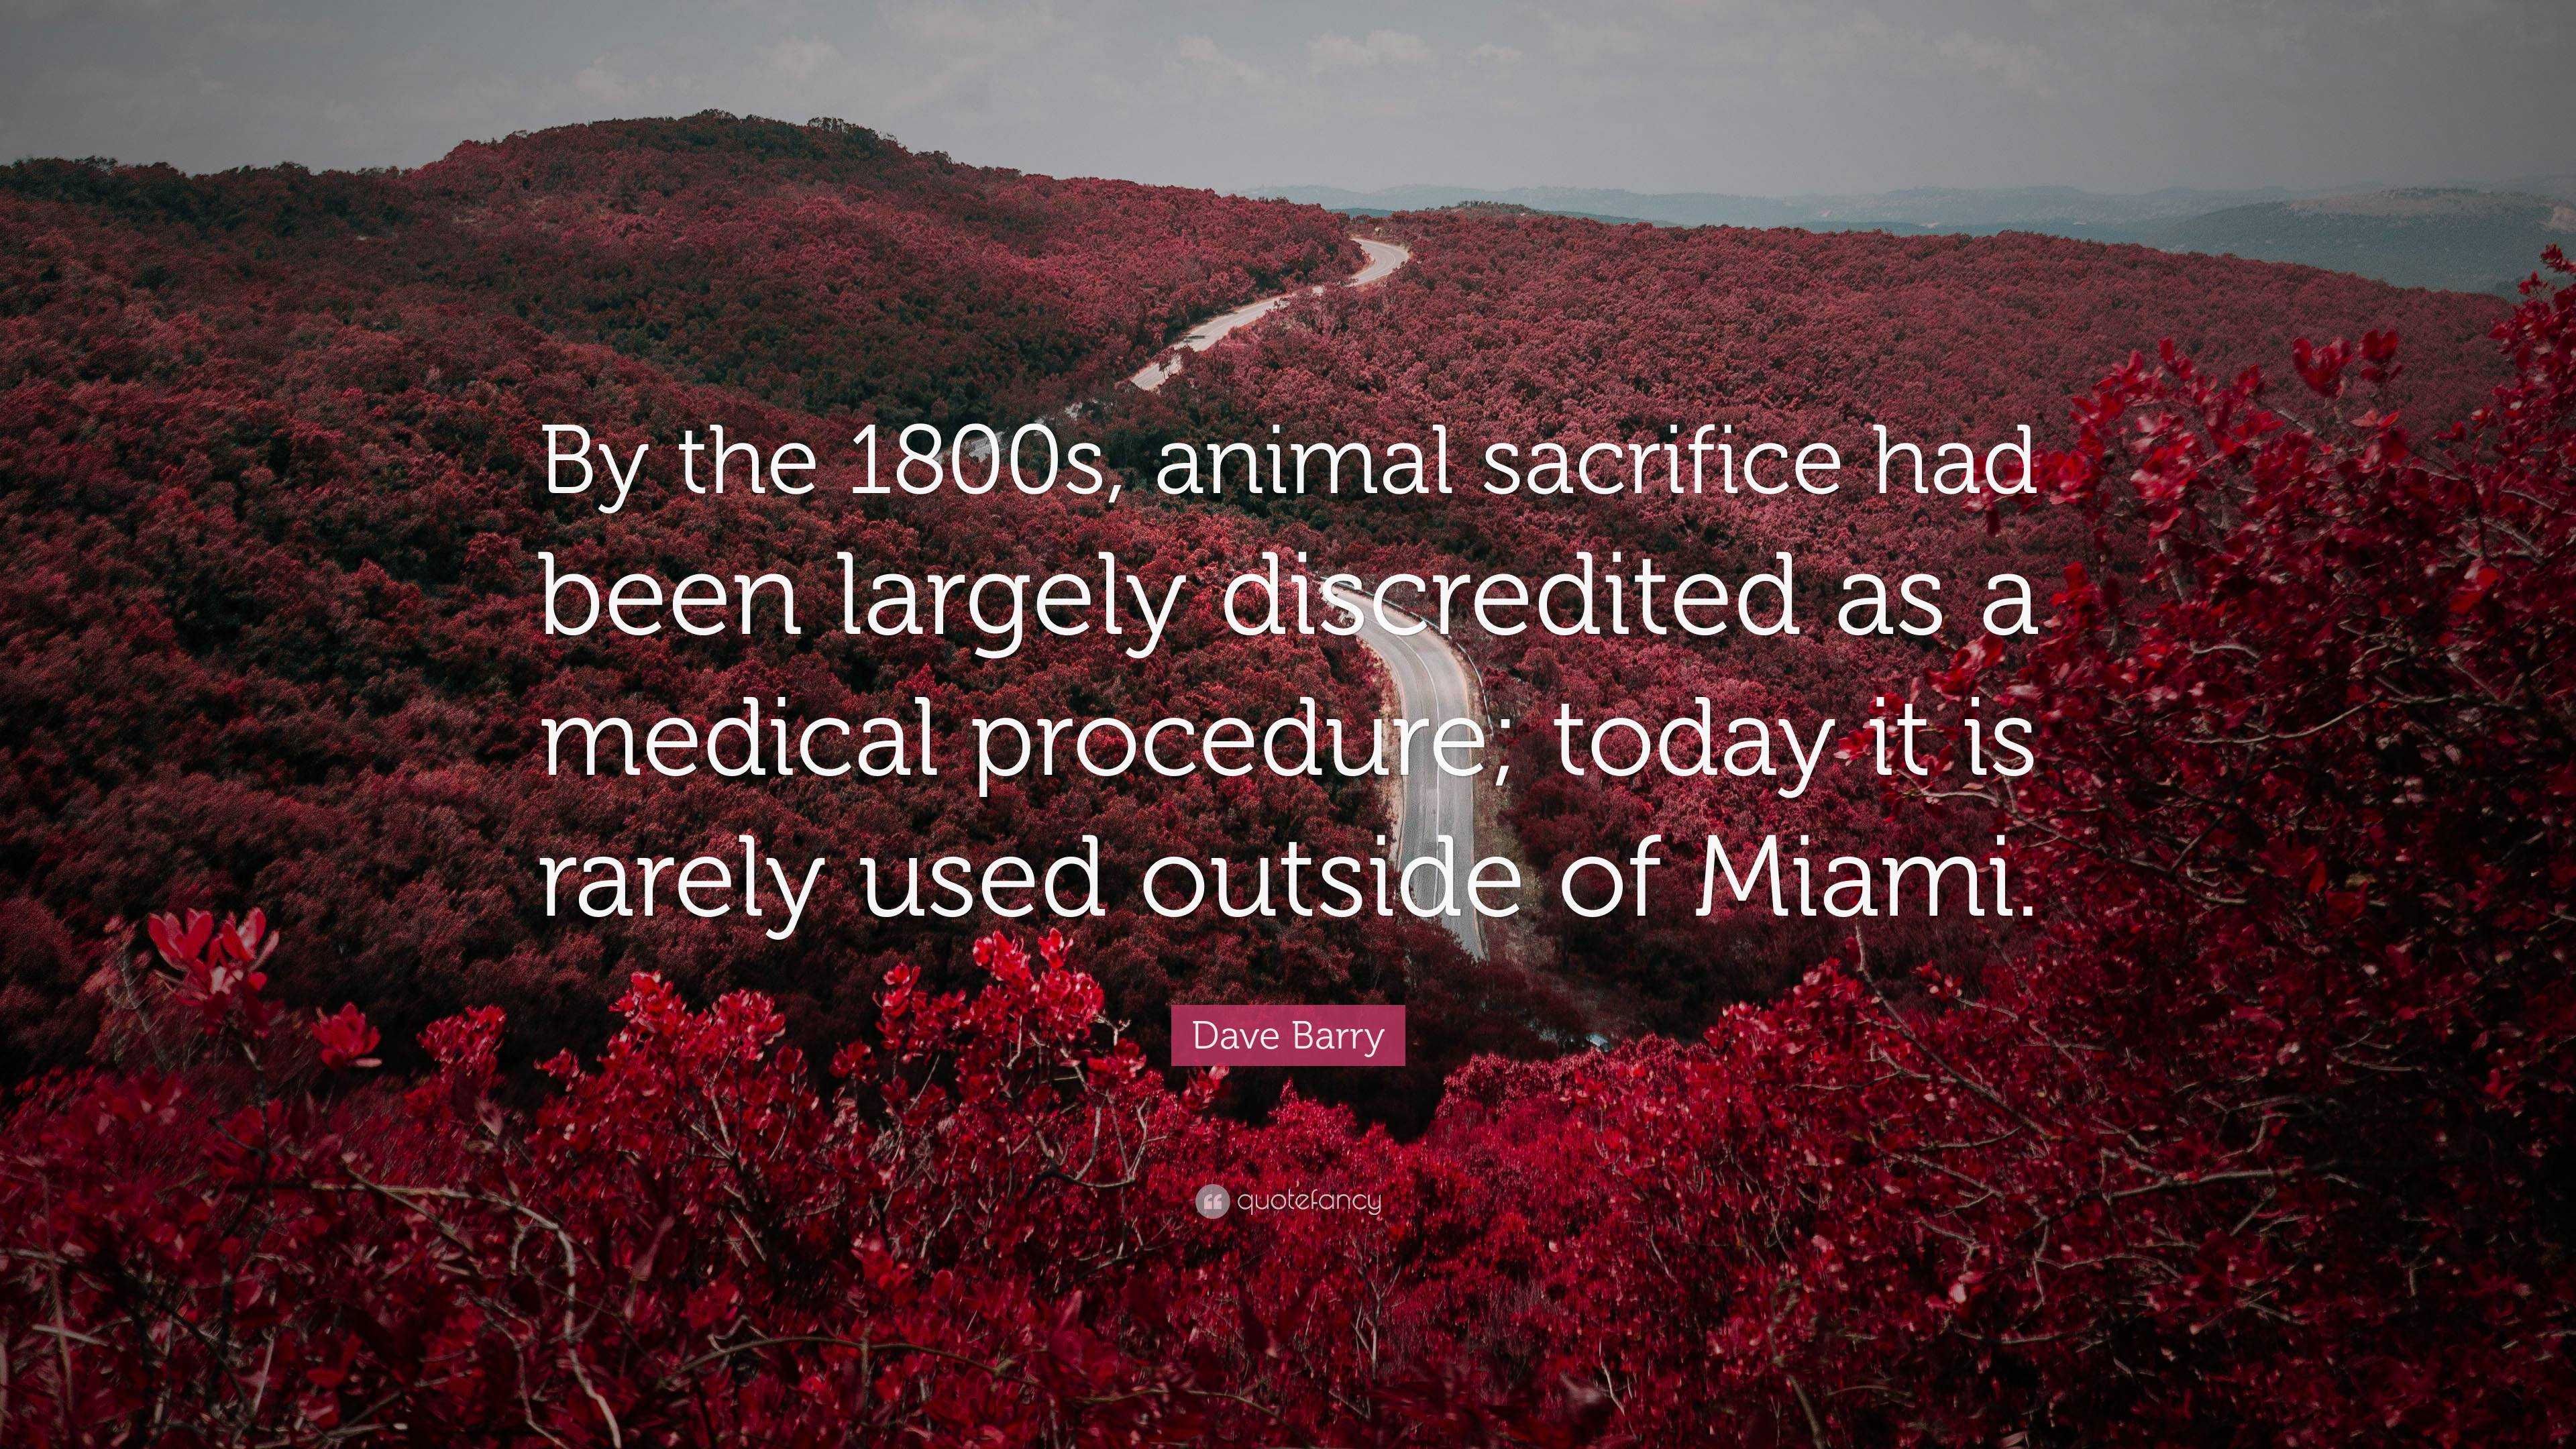 Dave Barry Quote: “By the 1800s, animal sacrifice had been largely  discredited as a medical procedure; today it is rarely used outside of M...”